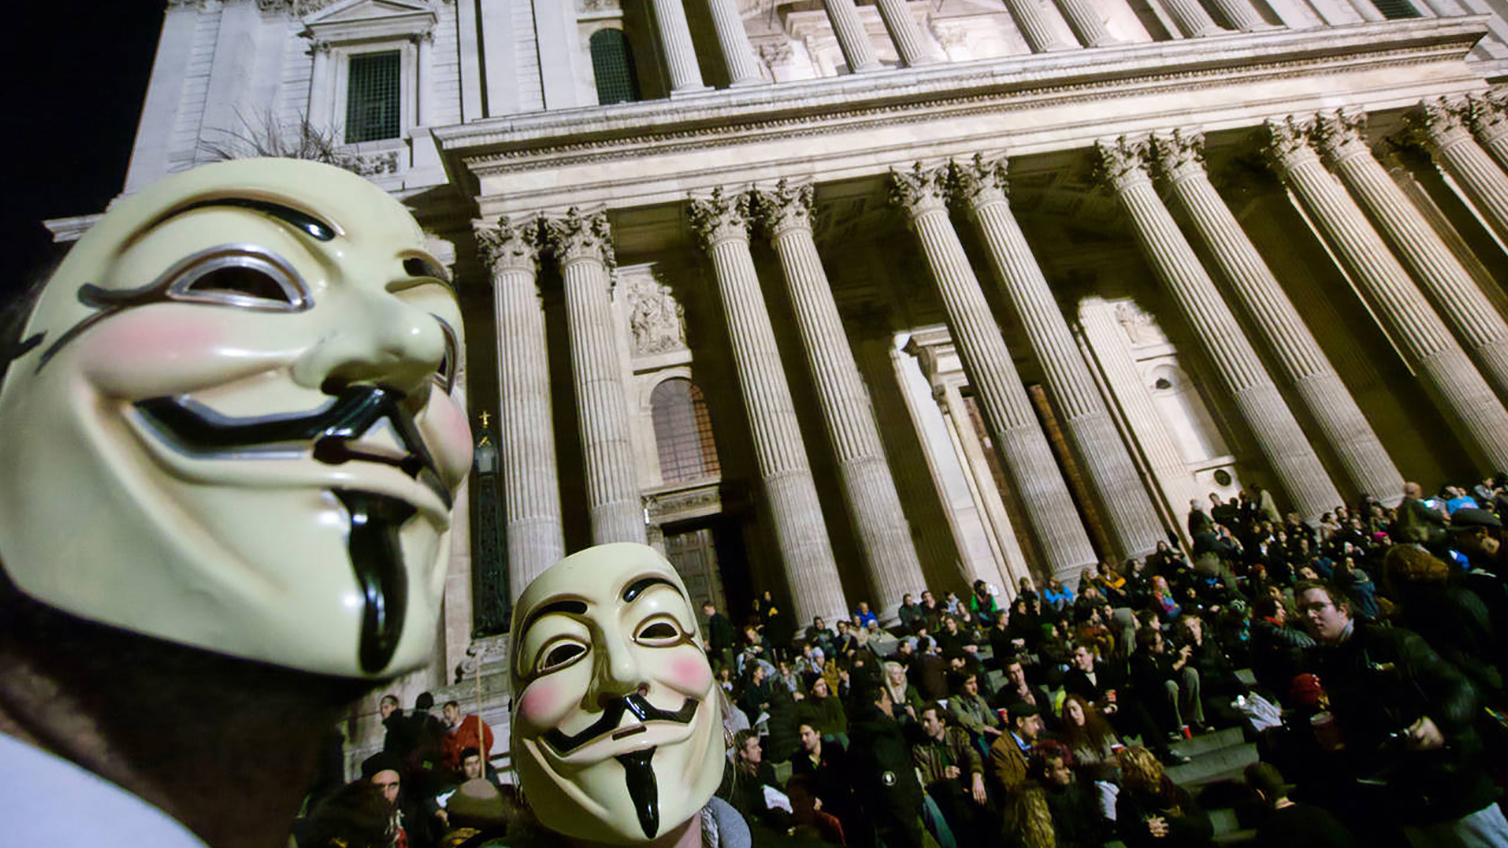 Protesters wearing masks at the Occupy London protest outside St Paul s Cathedral in London Photo: David Pearson / Alamy Stock Photo